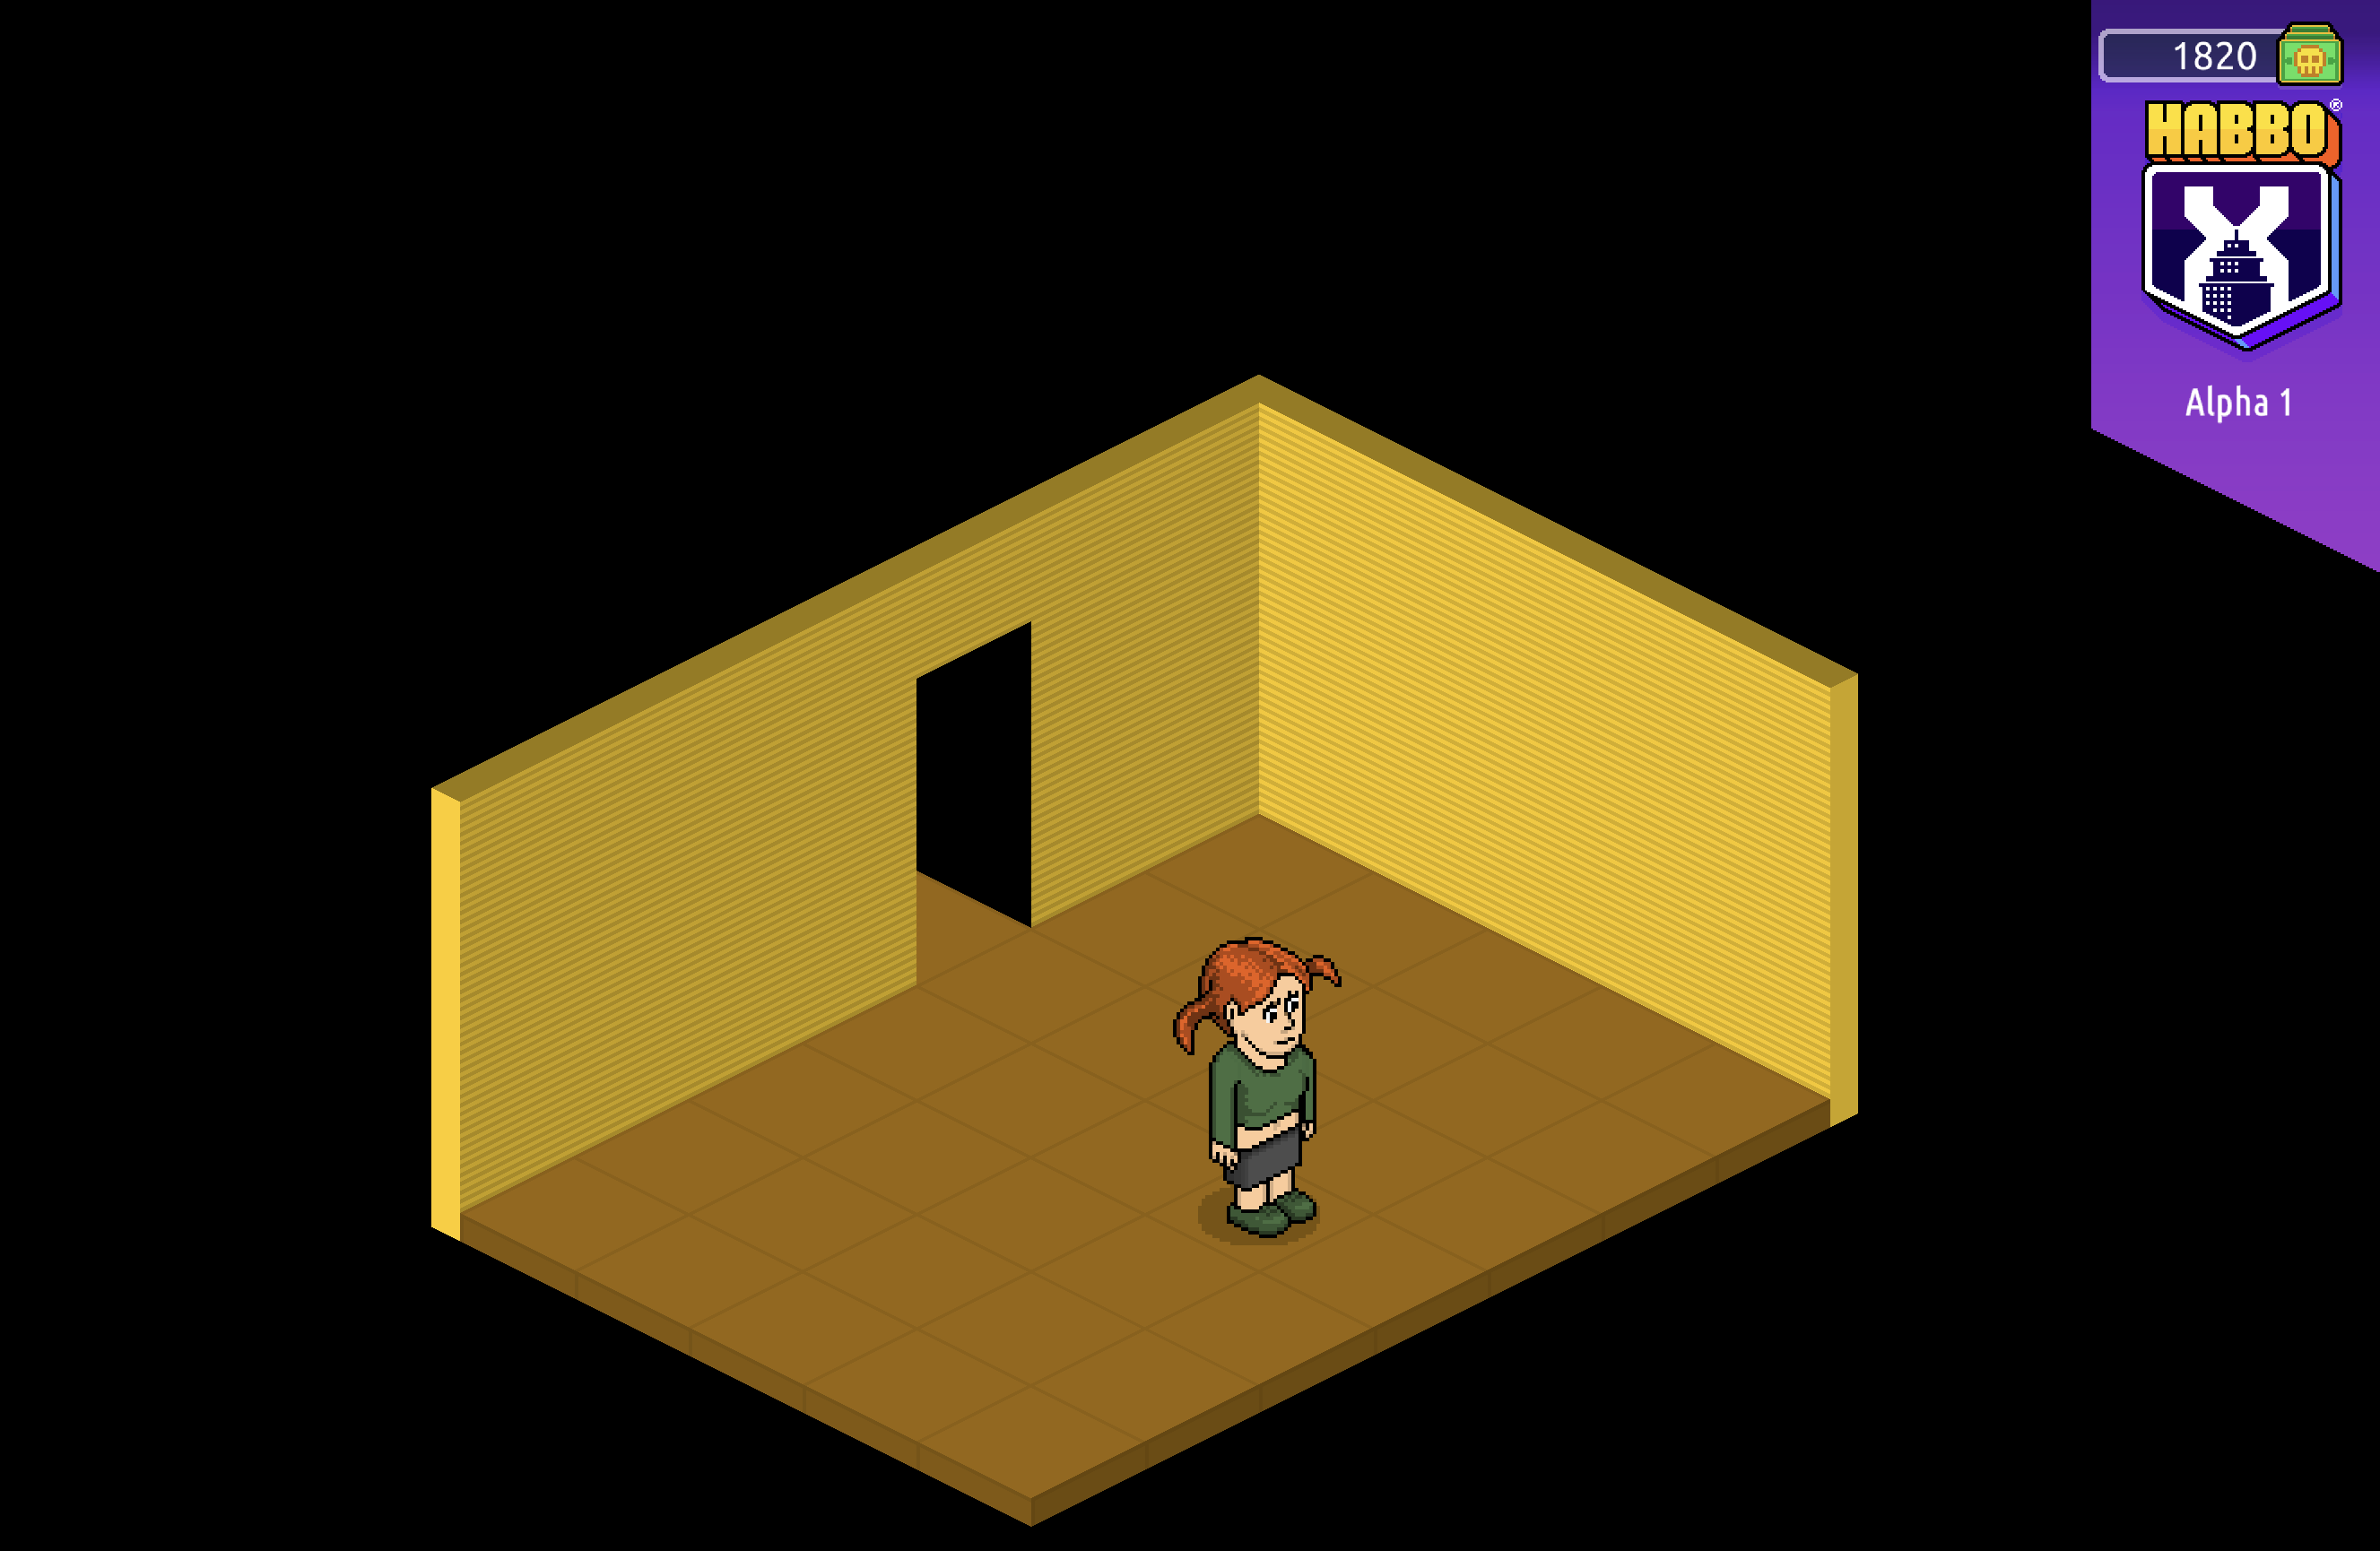 When a player enters the Habbo X, they can begin decorating their own room. They can buy and select furniture for their room using their Habbo credit.